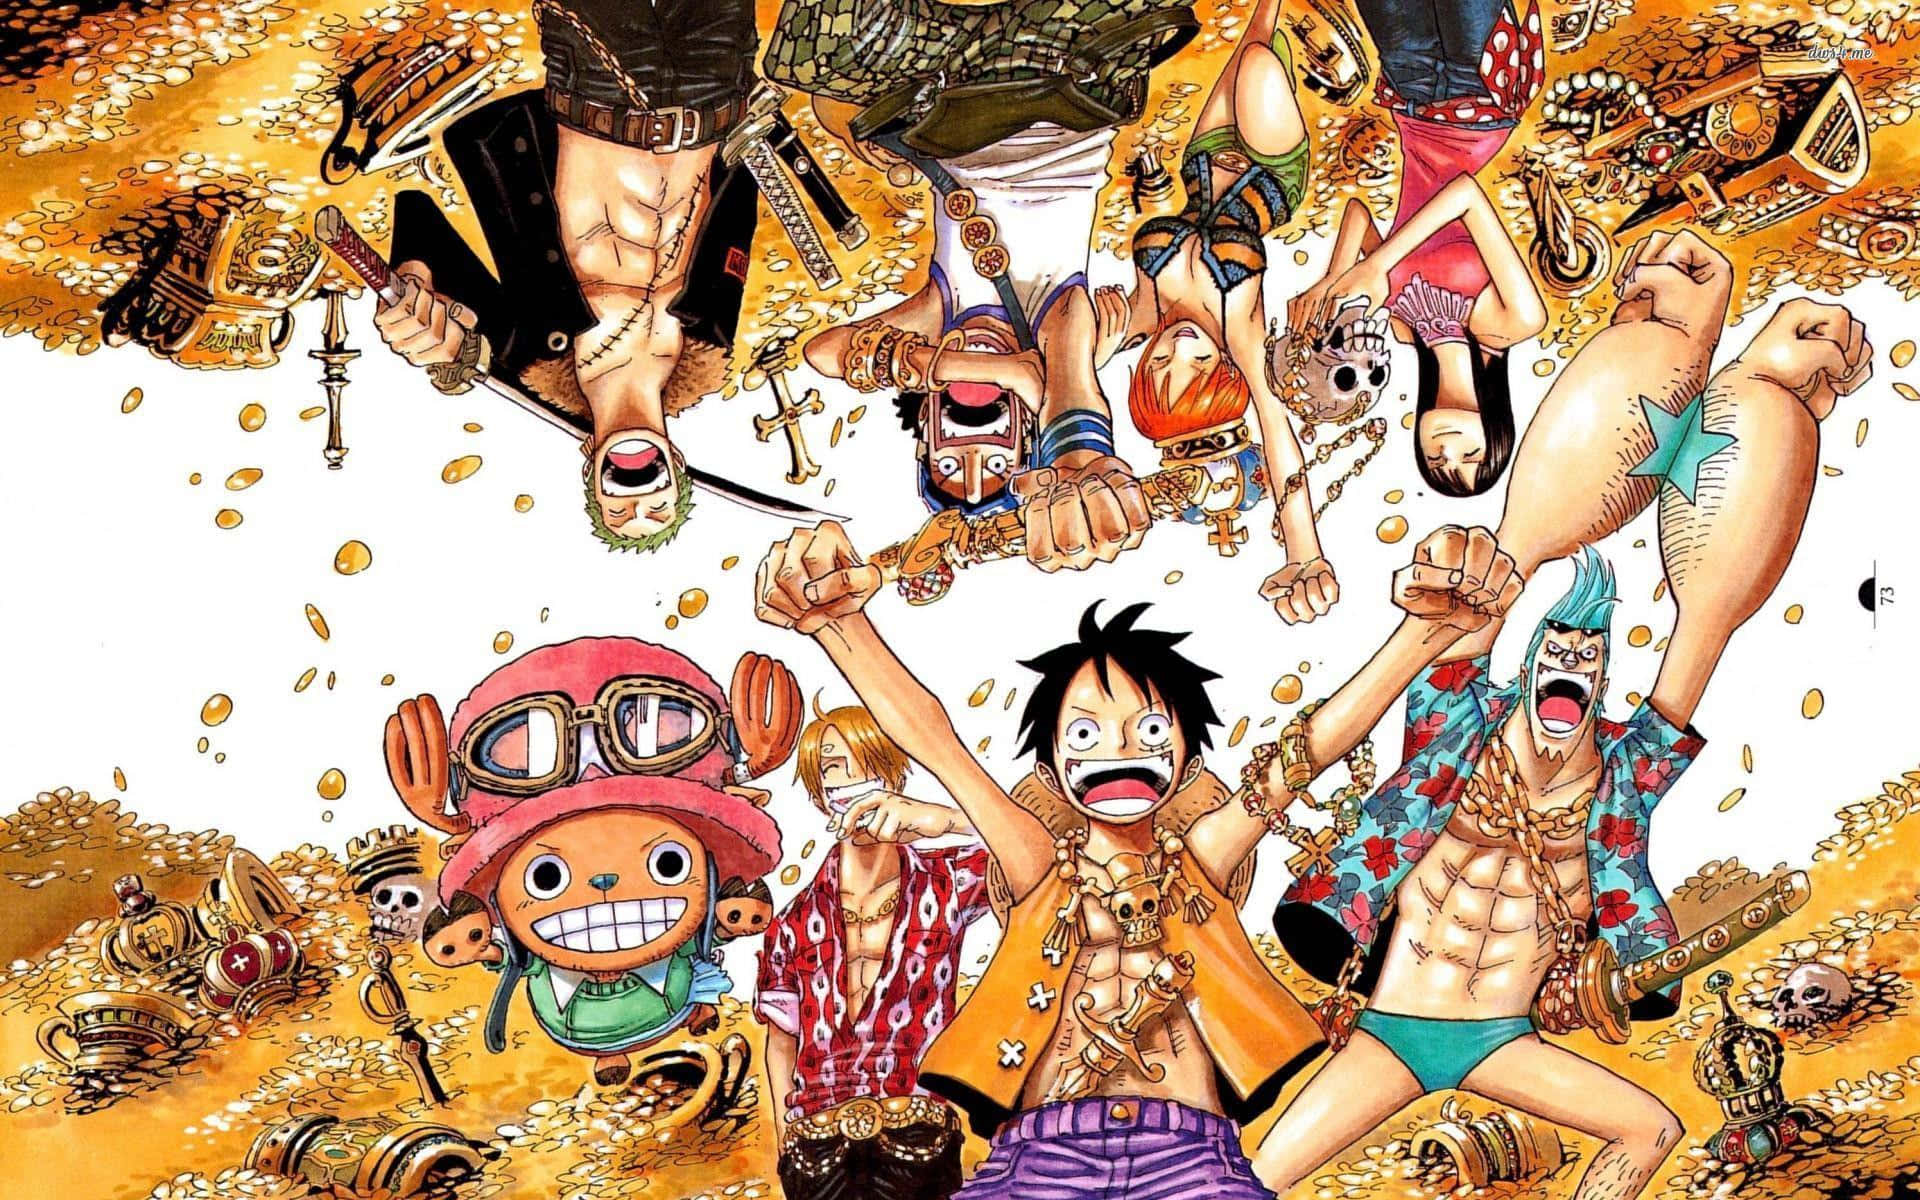 Enjoying a beautiful day in the Grand Line with some of the main characters in the anime One Piece. Wallpaper